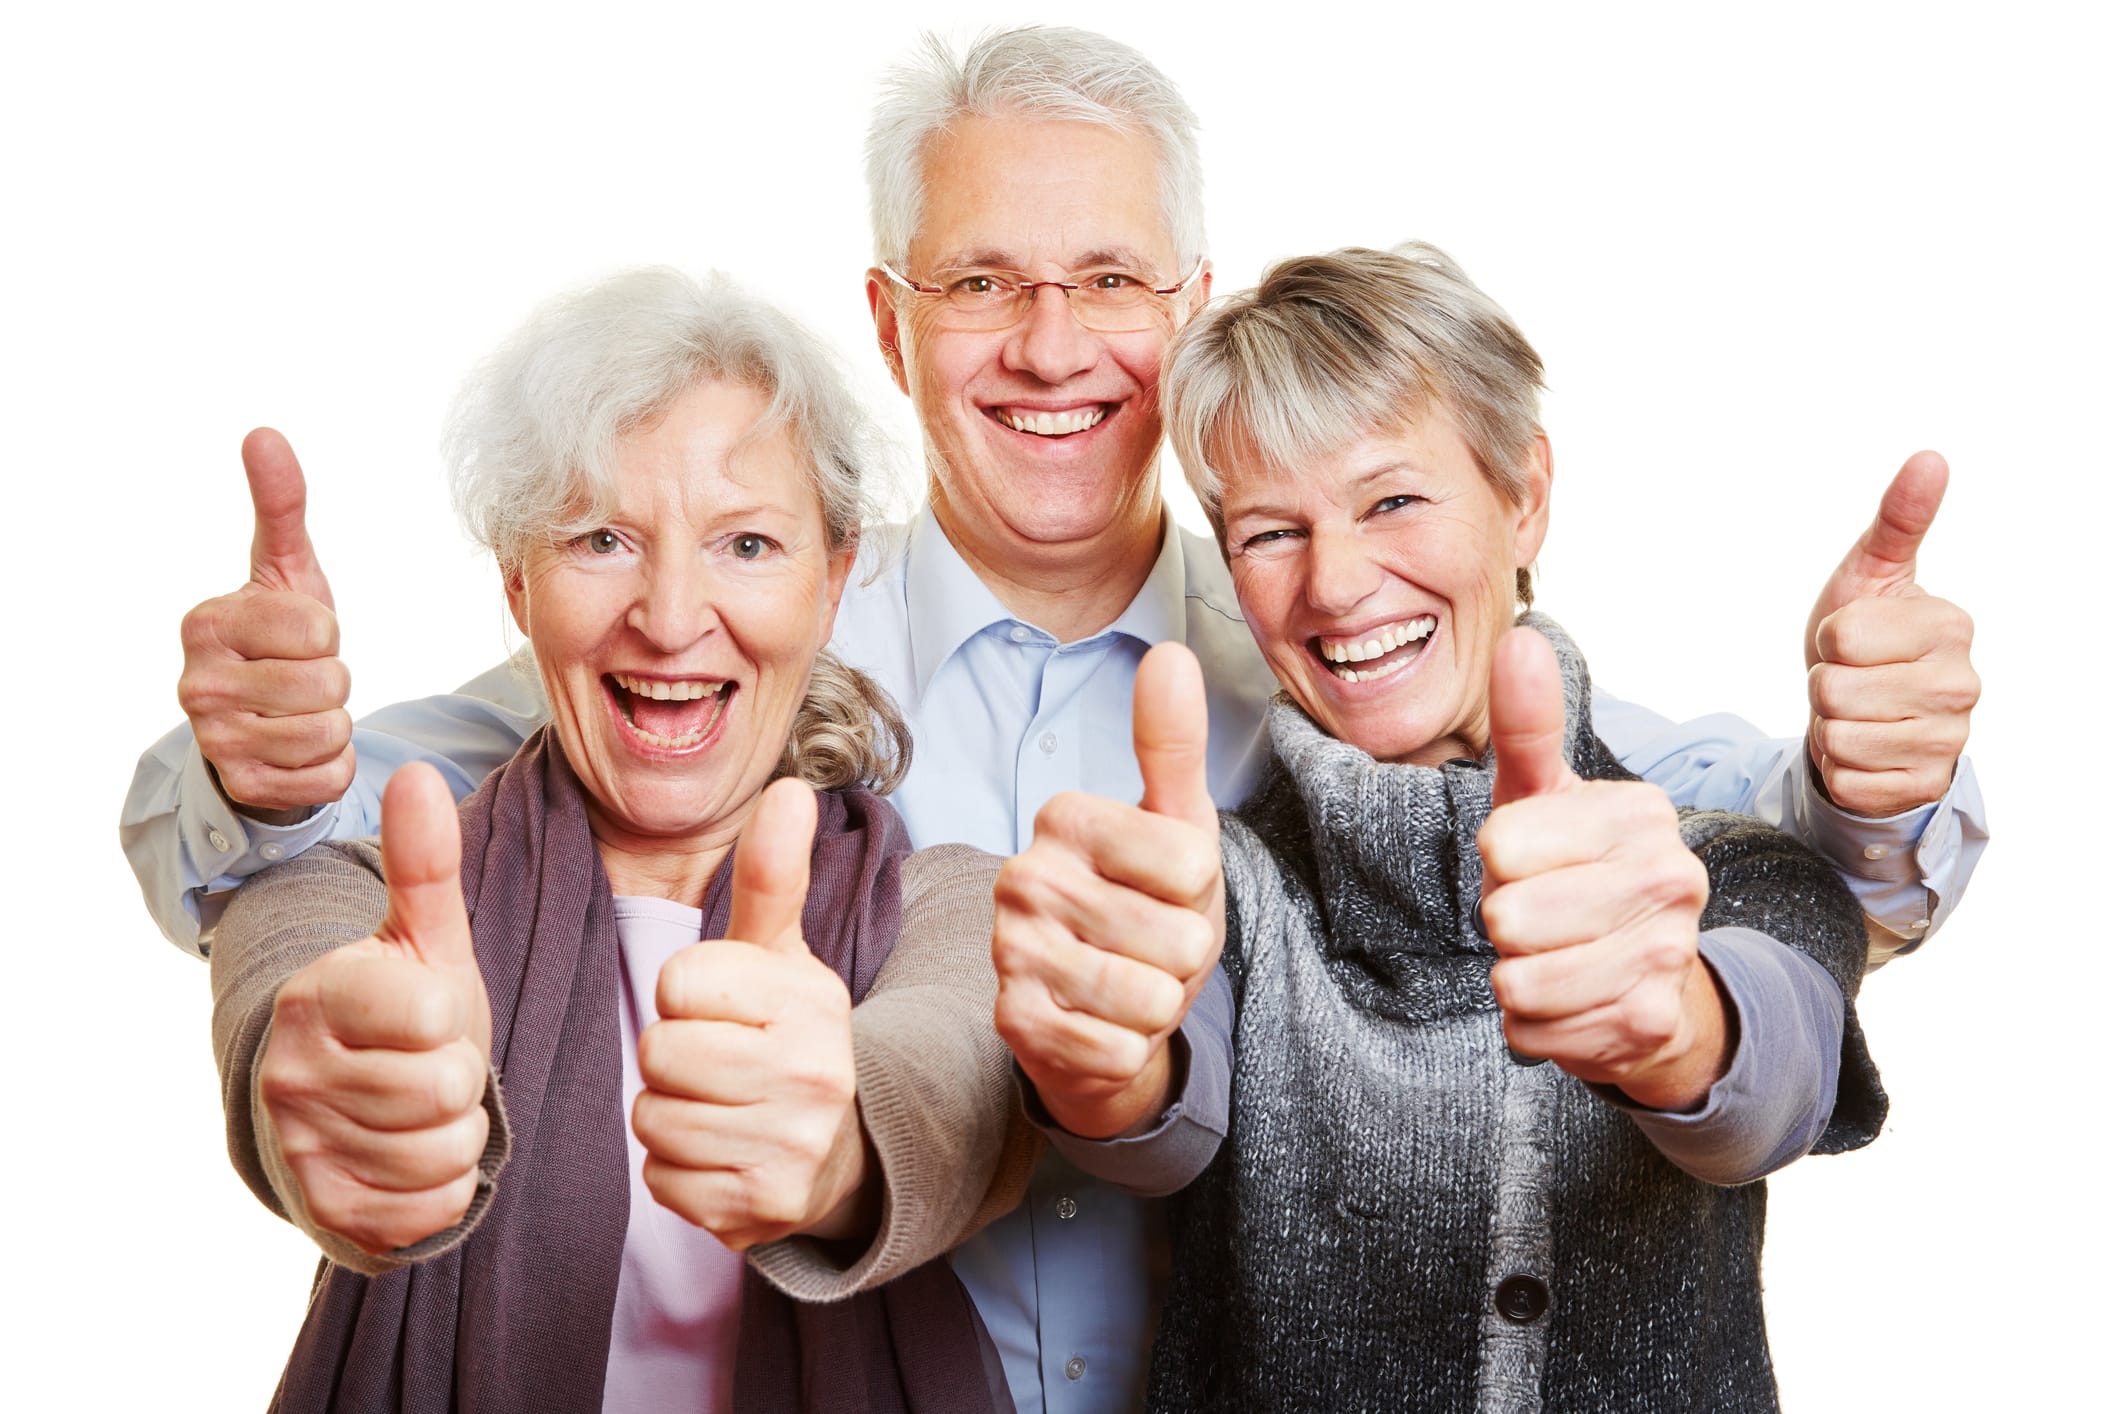 Three elderly people smiling with thumbs up